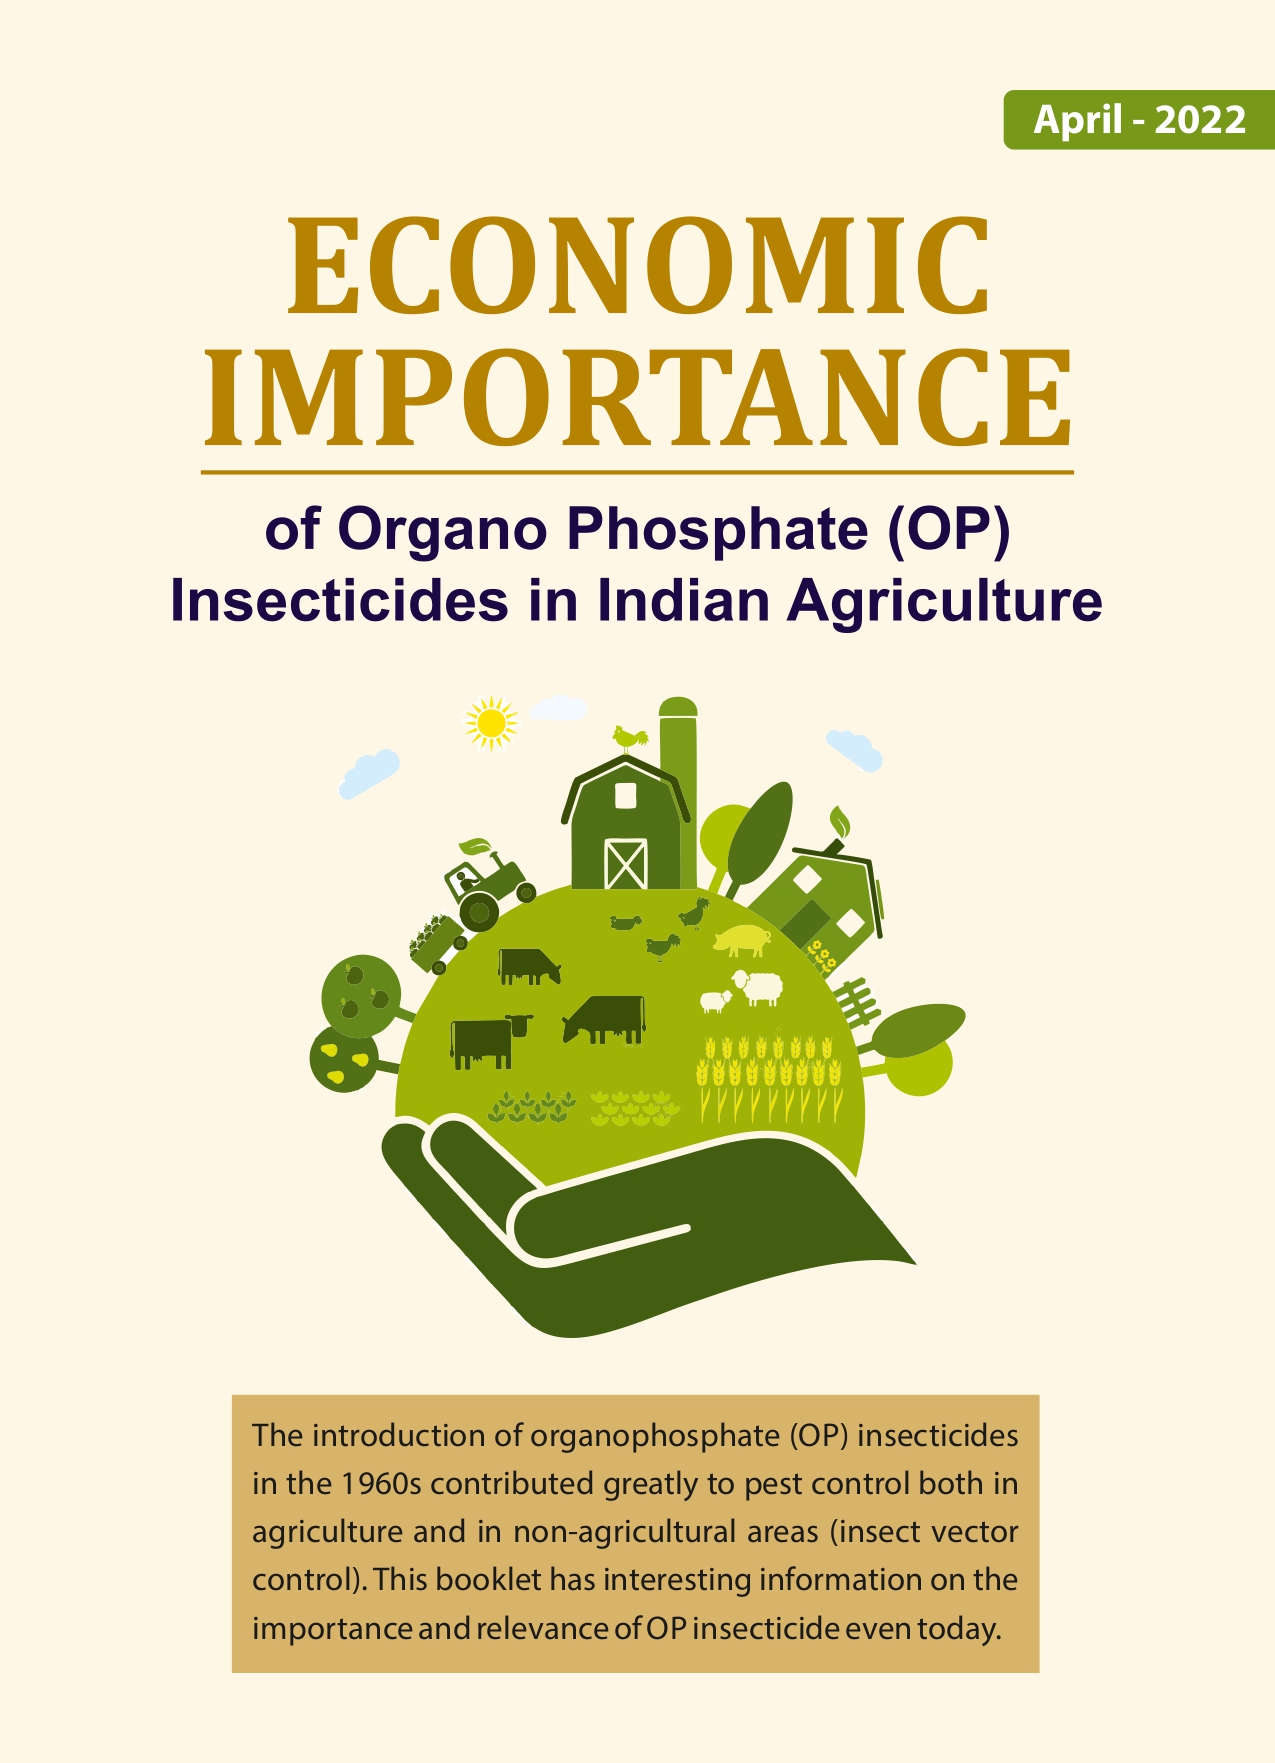 economic importance of op insecticides